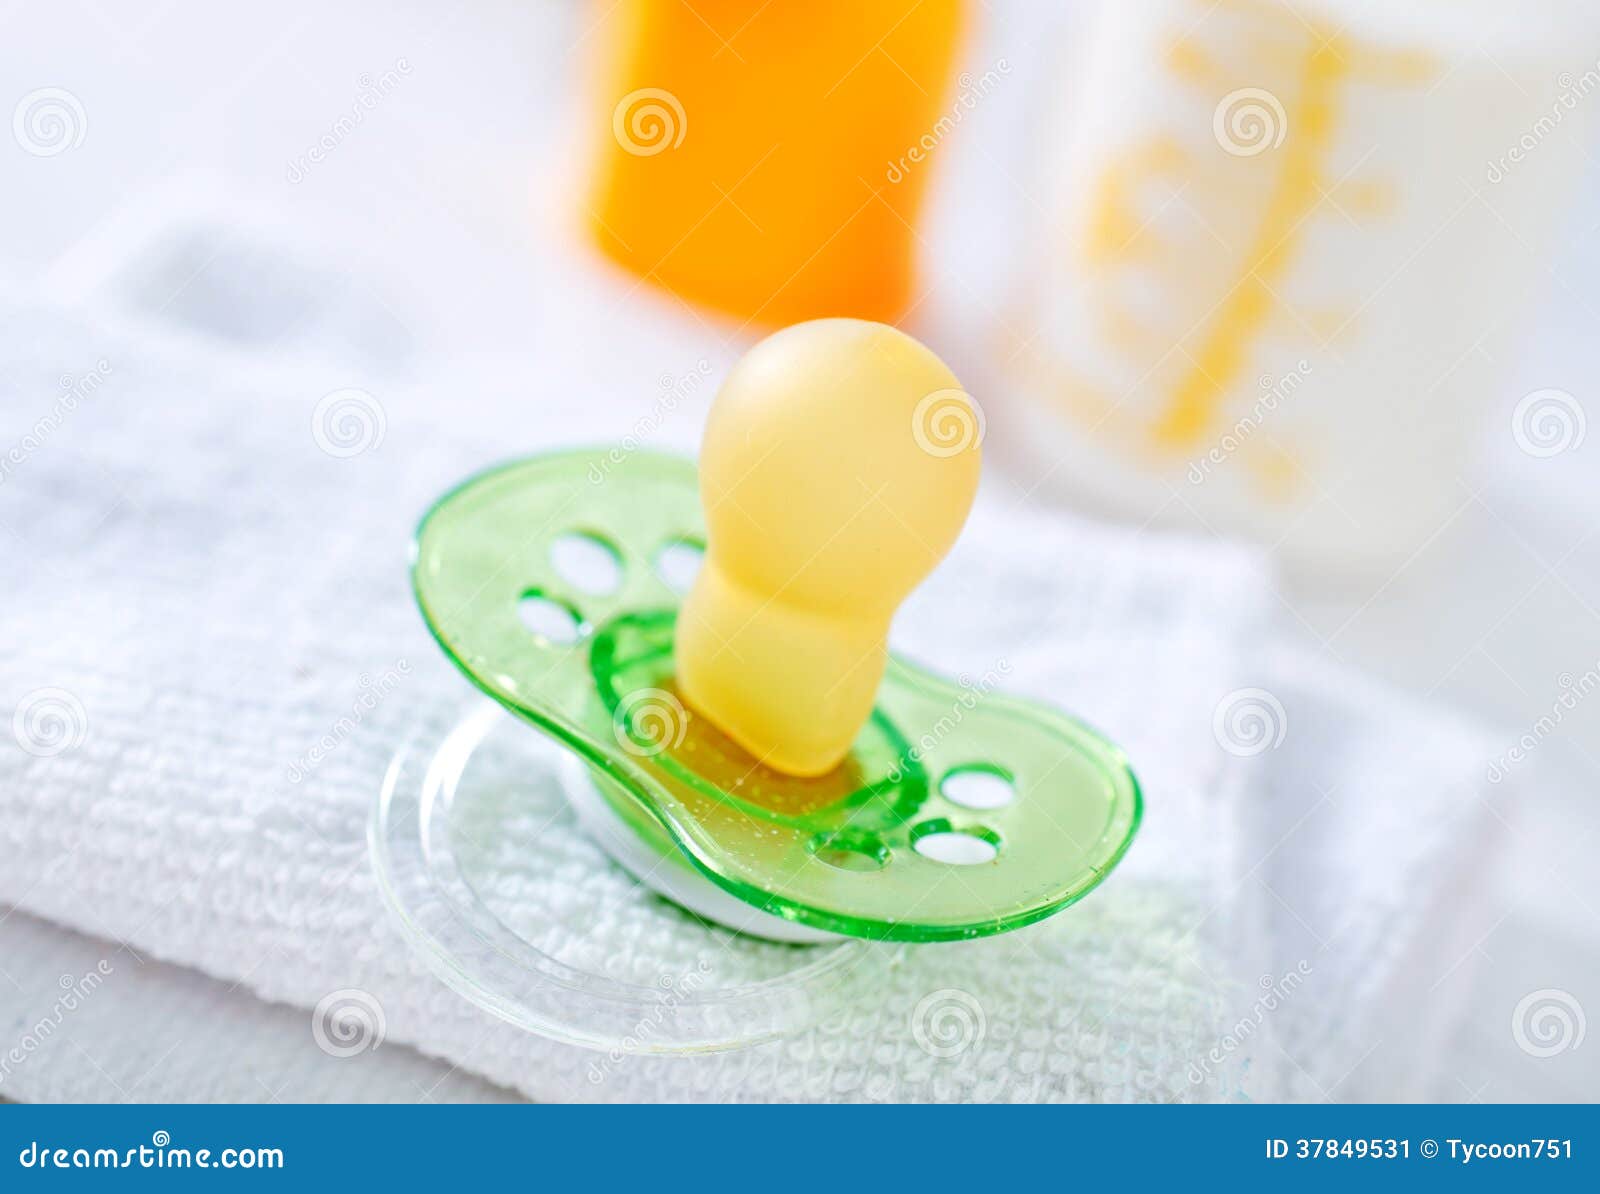 Baby dummy stock image. Image of nutrition, container - 37849531